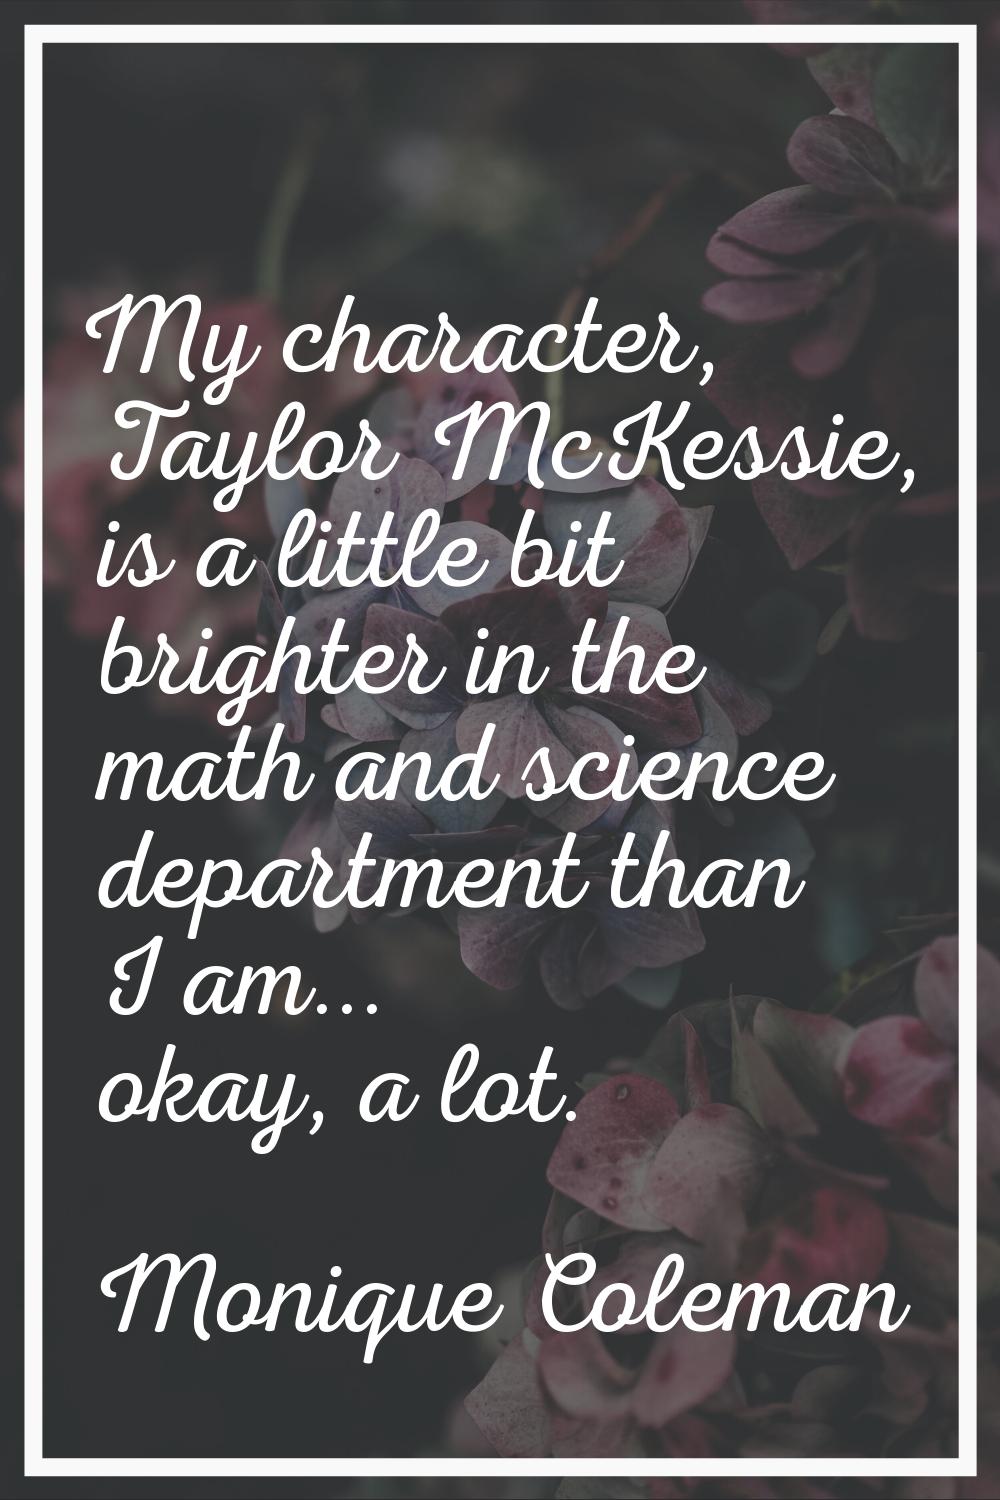 My character, Taylor McKessie, is a little bit brighter in the math and science department than I a